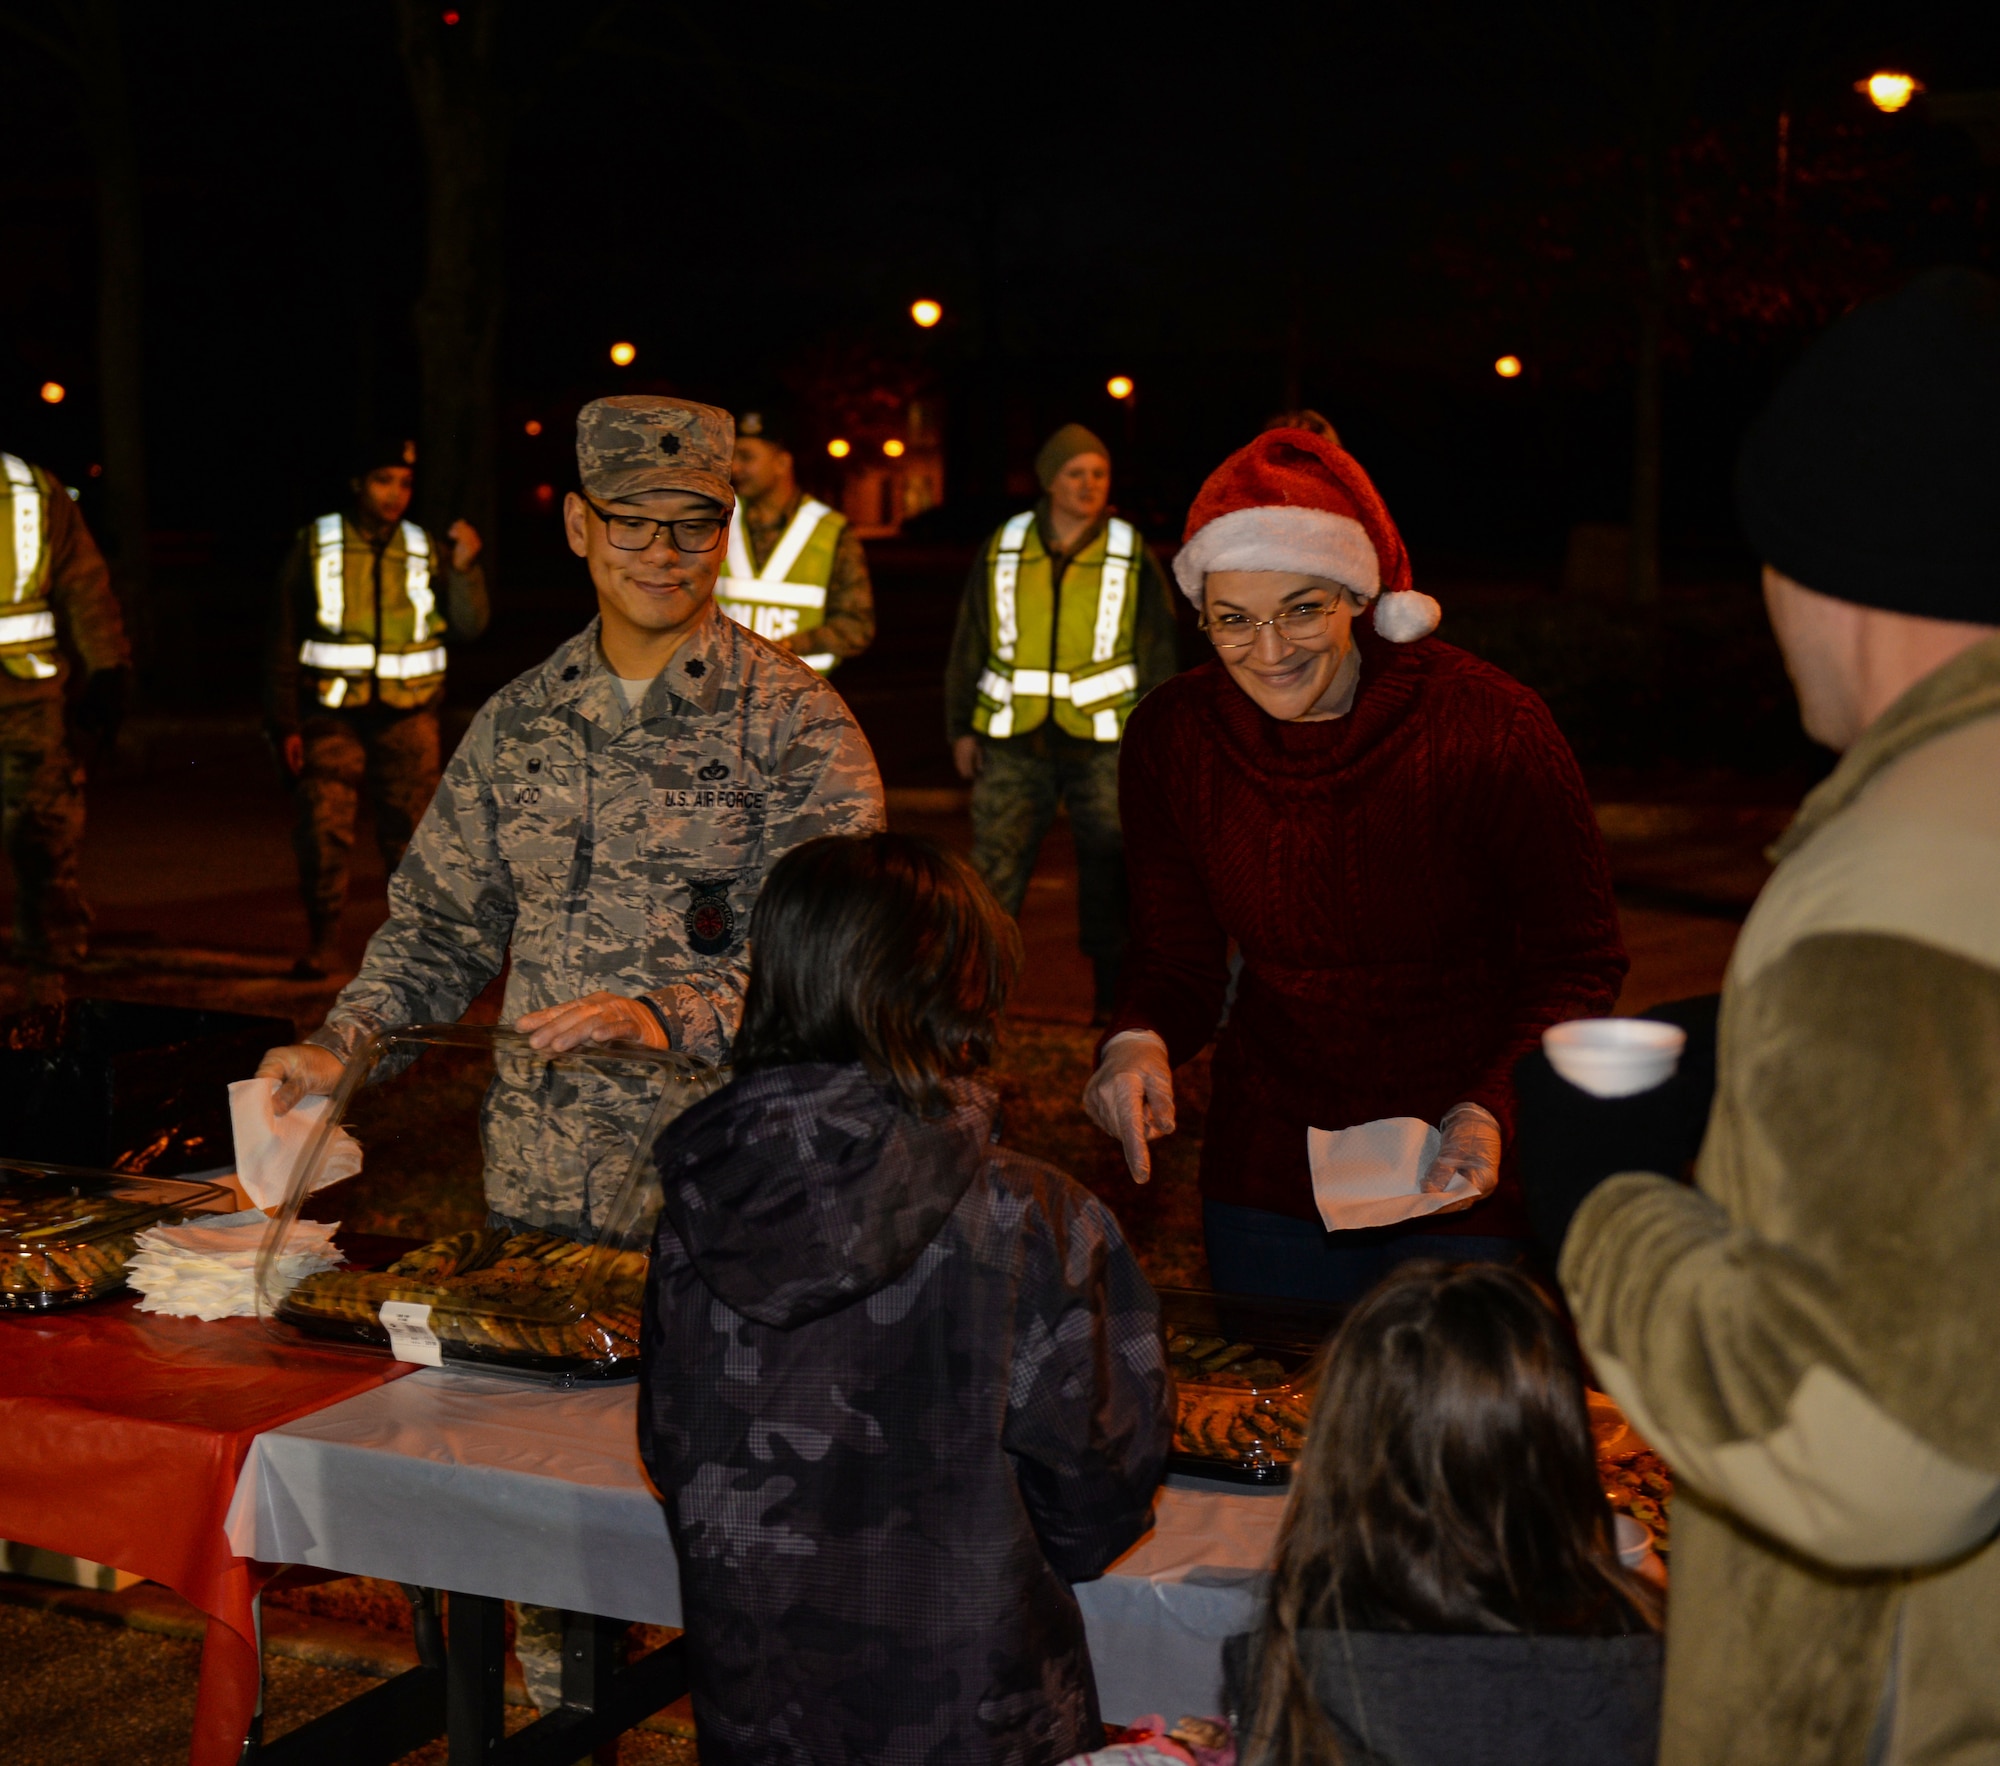 Team BLAZE members hand out cookies to families on Dec. 3, 2019, on Columbus Air Force Base, Miss. Team BLAZE kicked off the holiday season with Santa’s T-1A Jayhawk arrival followed by a tree lighting ceremony; hot chocolate and toys were also given out during the event. (U.S. Air Force photo by Airman Davis Donaldson)